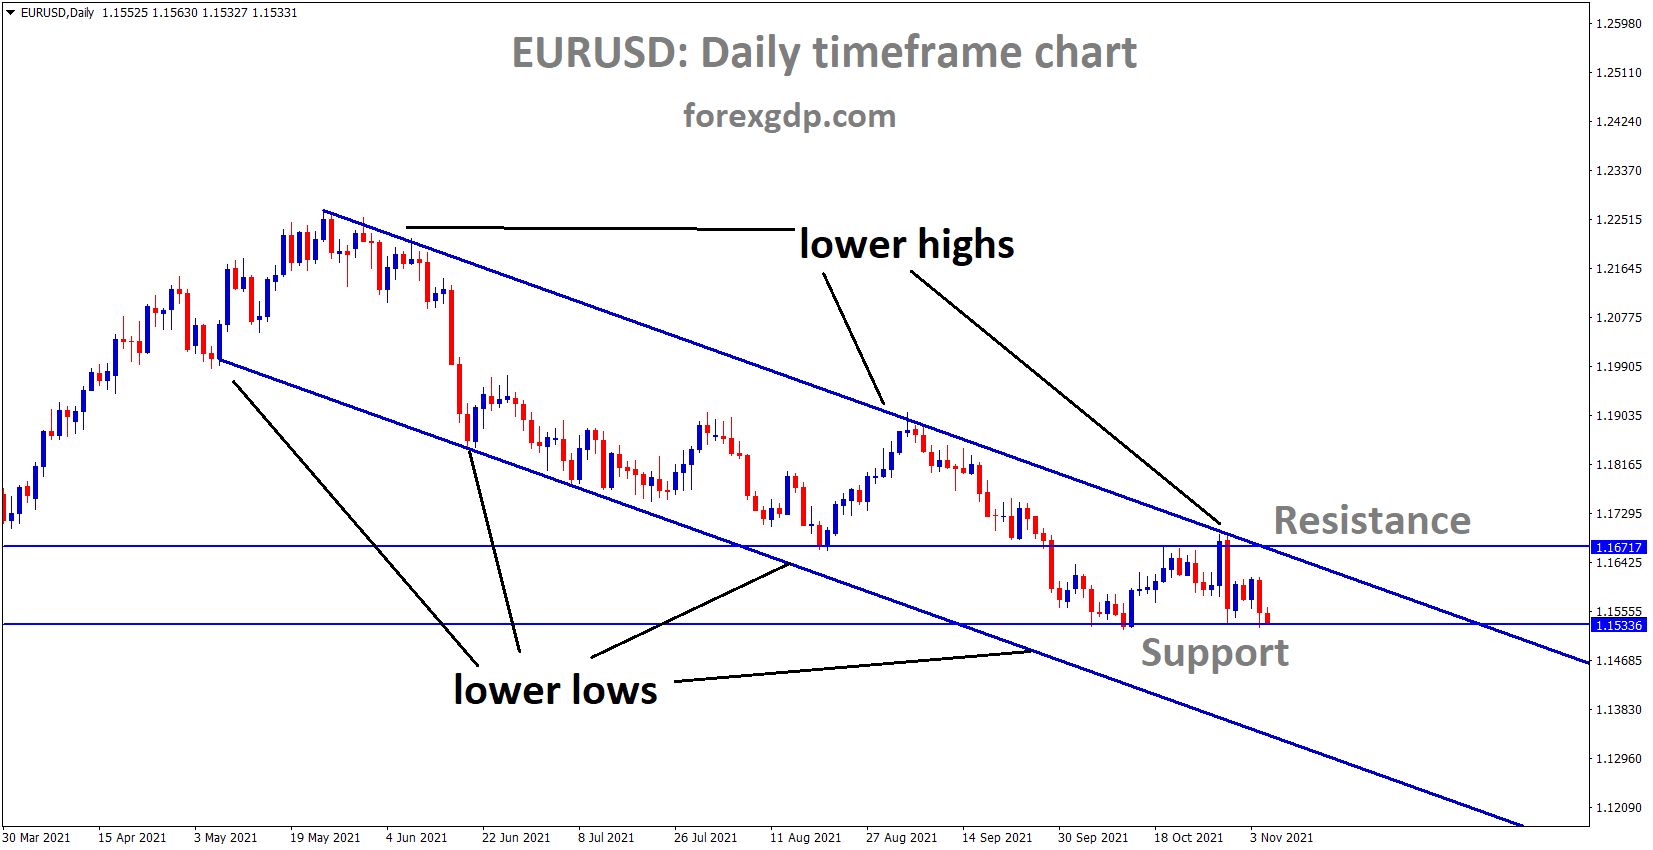 EURUSD is moving in the Descending channel and the market has reached the recent support